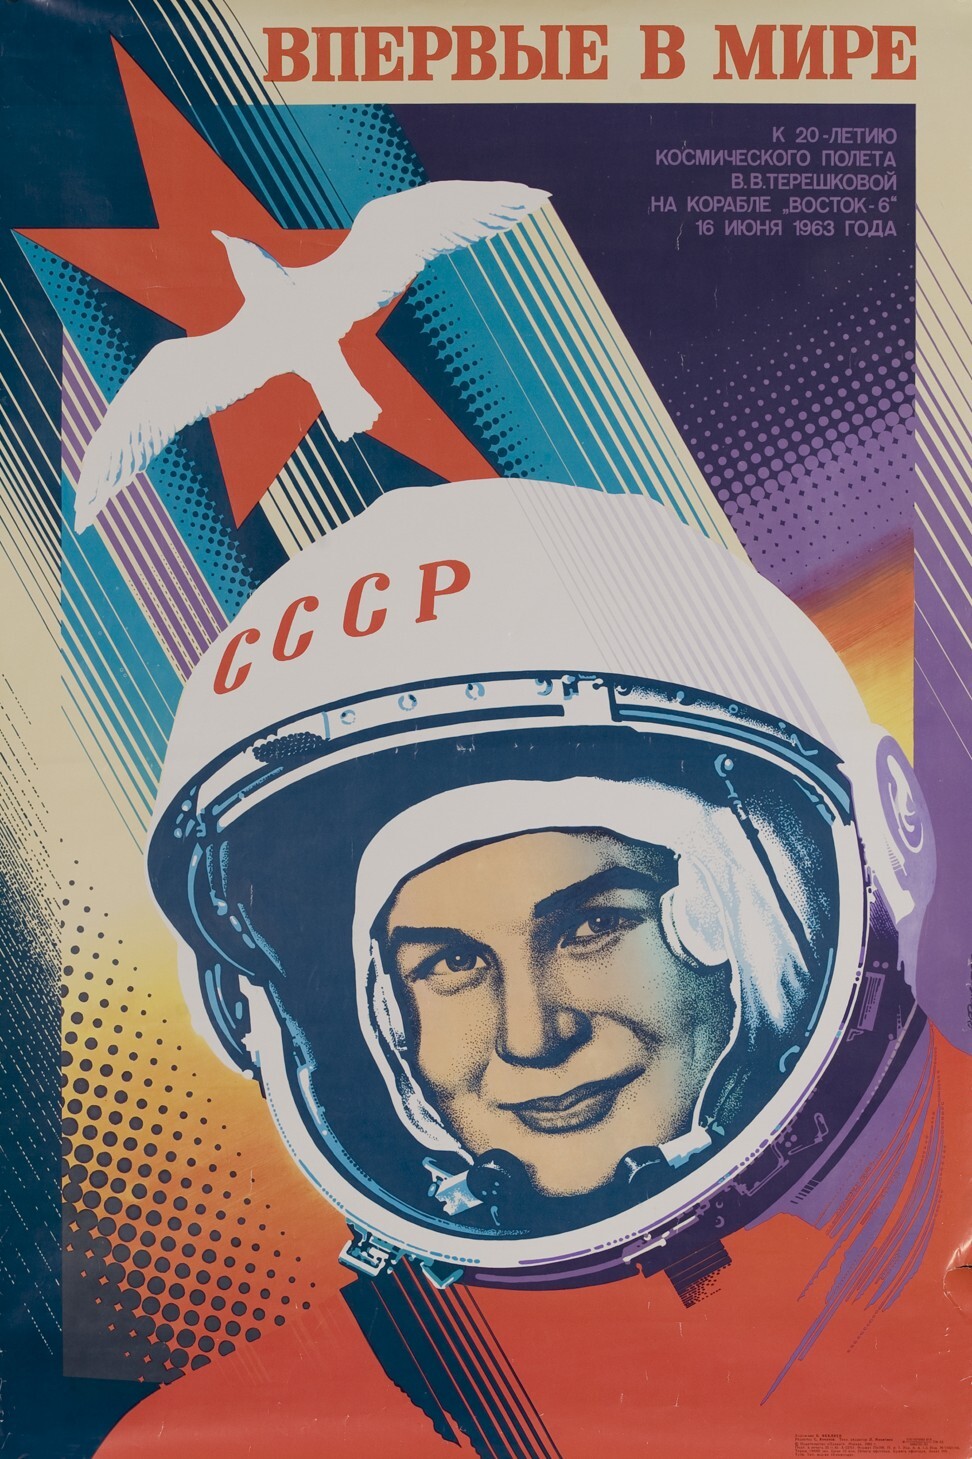 Poster commemorating the 1963 flight of Valentina Tereshkova, the first woman in space. Photo: David Pollack/Corbis via Getty Images